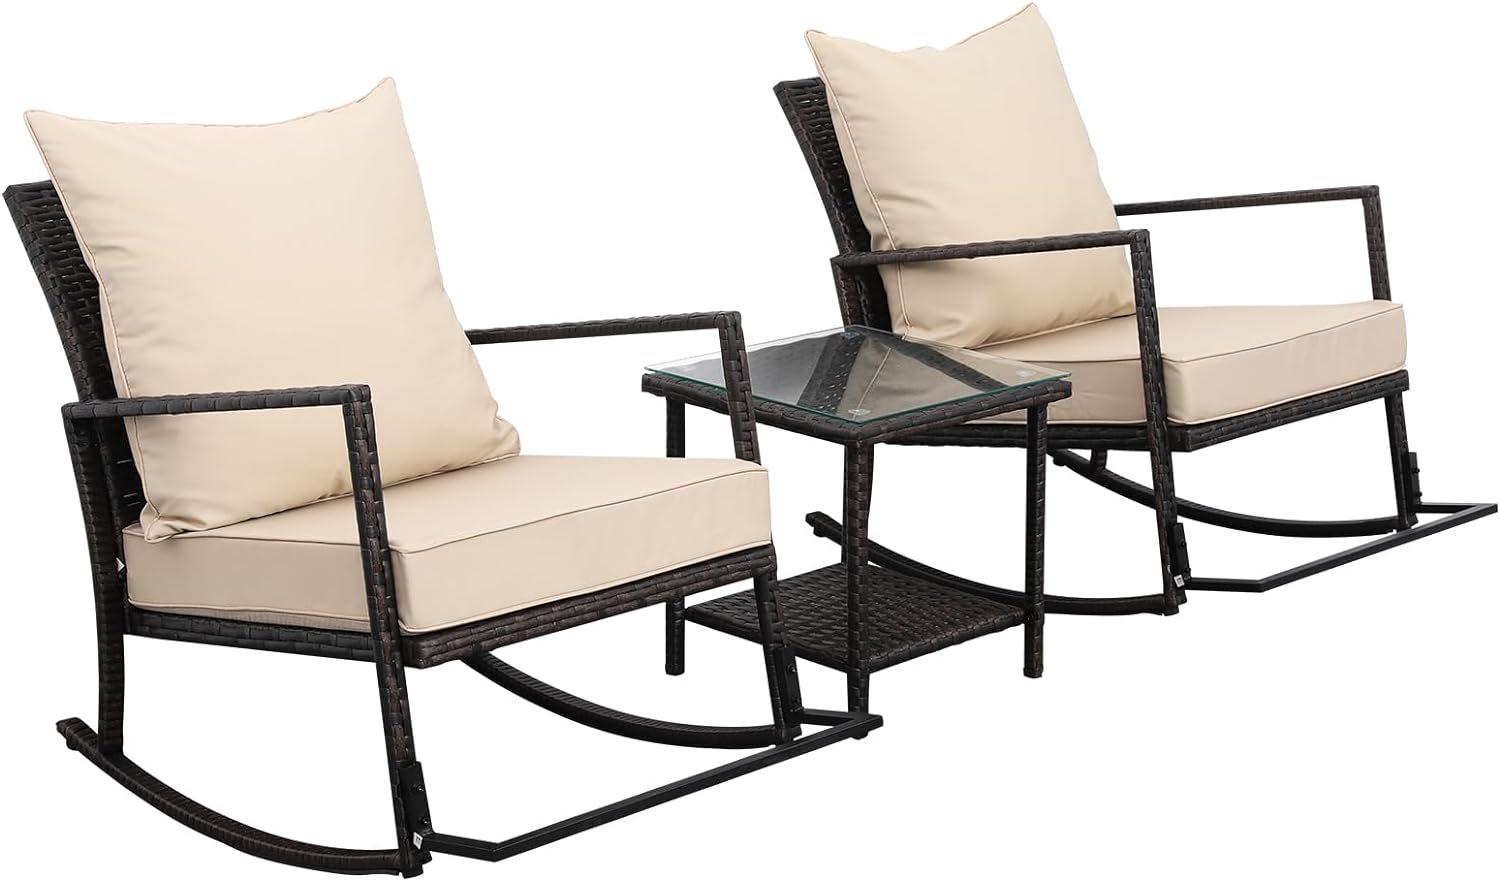 Rattaner Outdoor Chairs Bistro Set Patio Rocking Chair Side Table 3 Pieces with Tempered Glass Coffee Table Outdoor Table and Chairs Anti-Slip Cushions, Khaki